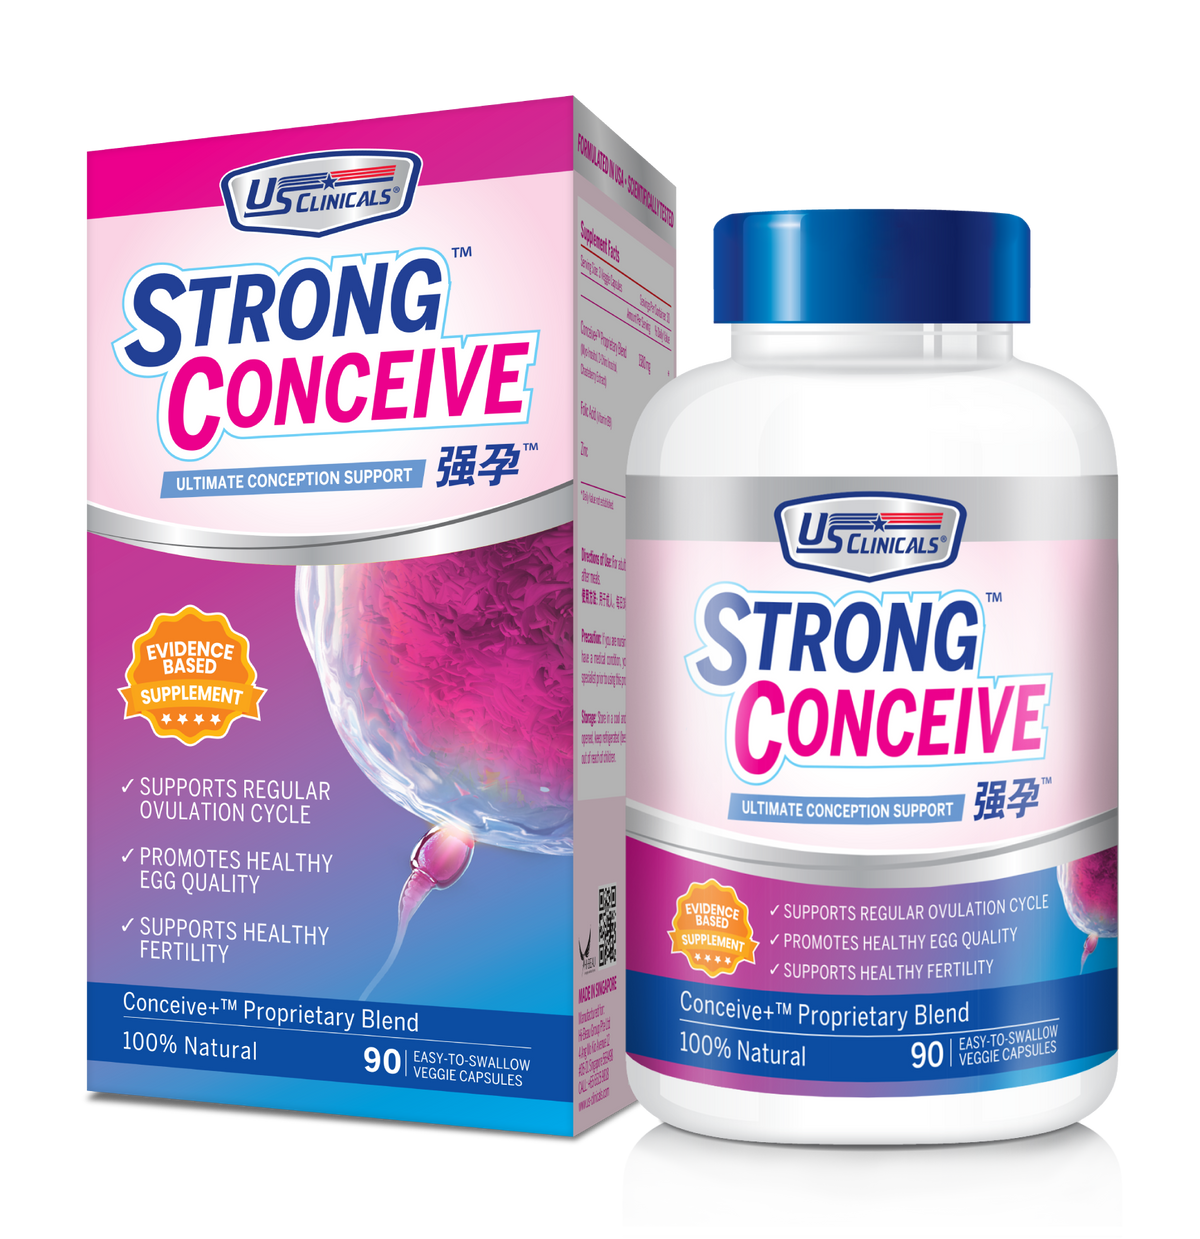 Singapore's No.1 Joint Supplement, StrongJoint™ contains contains Collagen Type II, which is 342% more effective than glucosamine alone. It helps to relieve 6 major joint problems in 7 days.